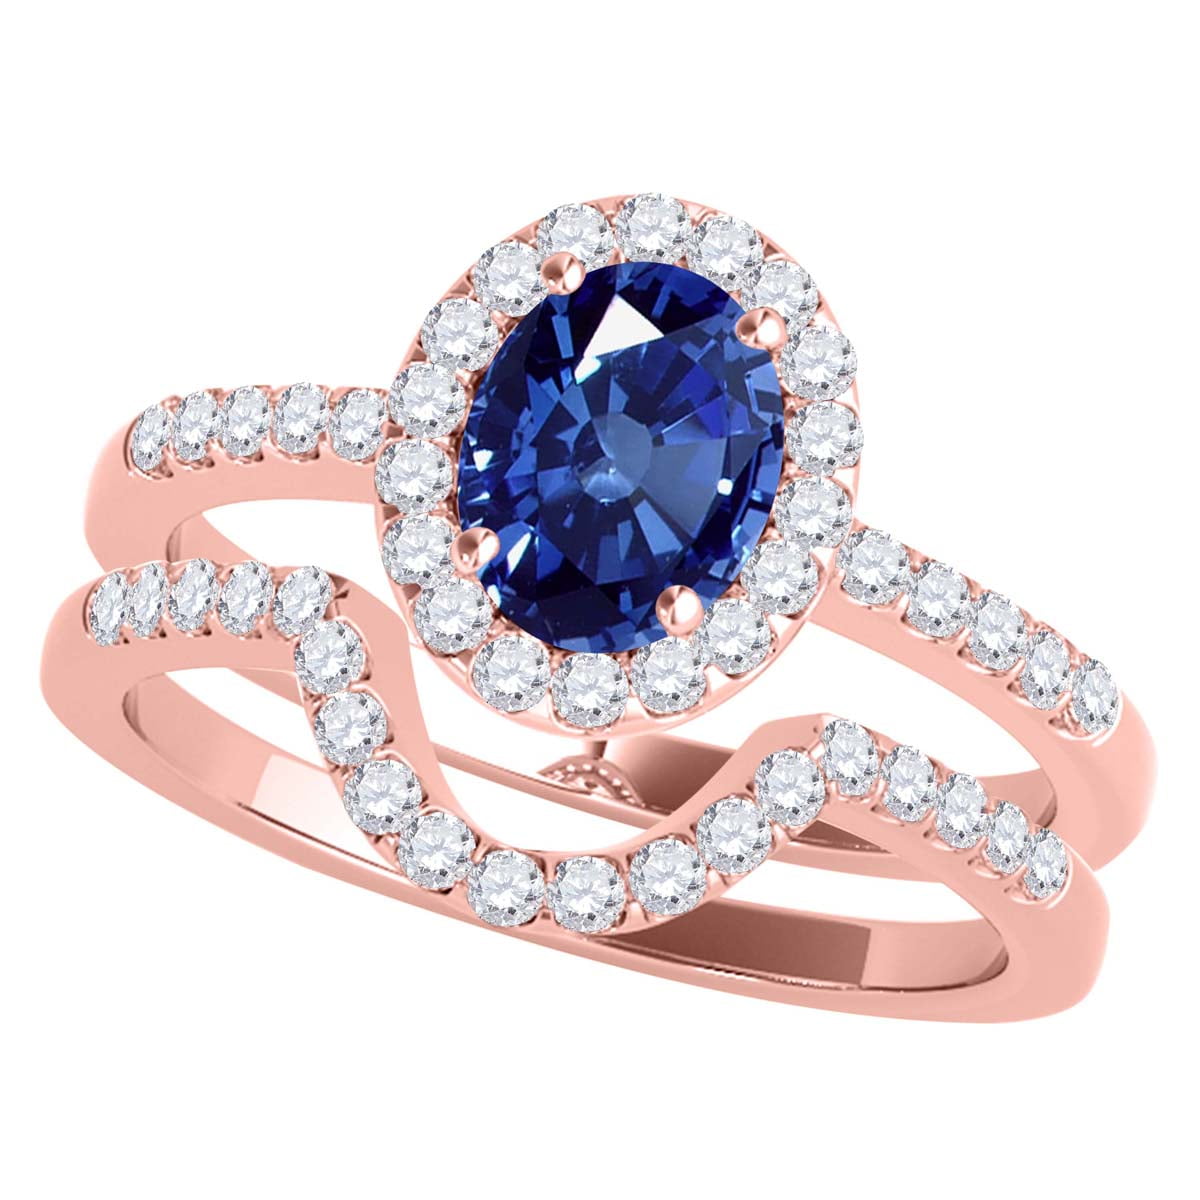 Mauli Jewels Engagement Rings for Women 1.10 Carat Oval Shaped Sapphire ...